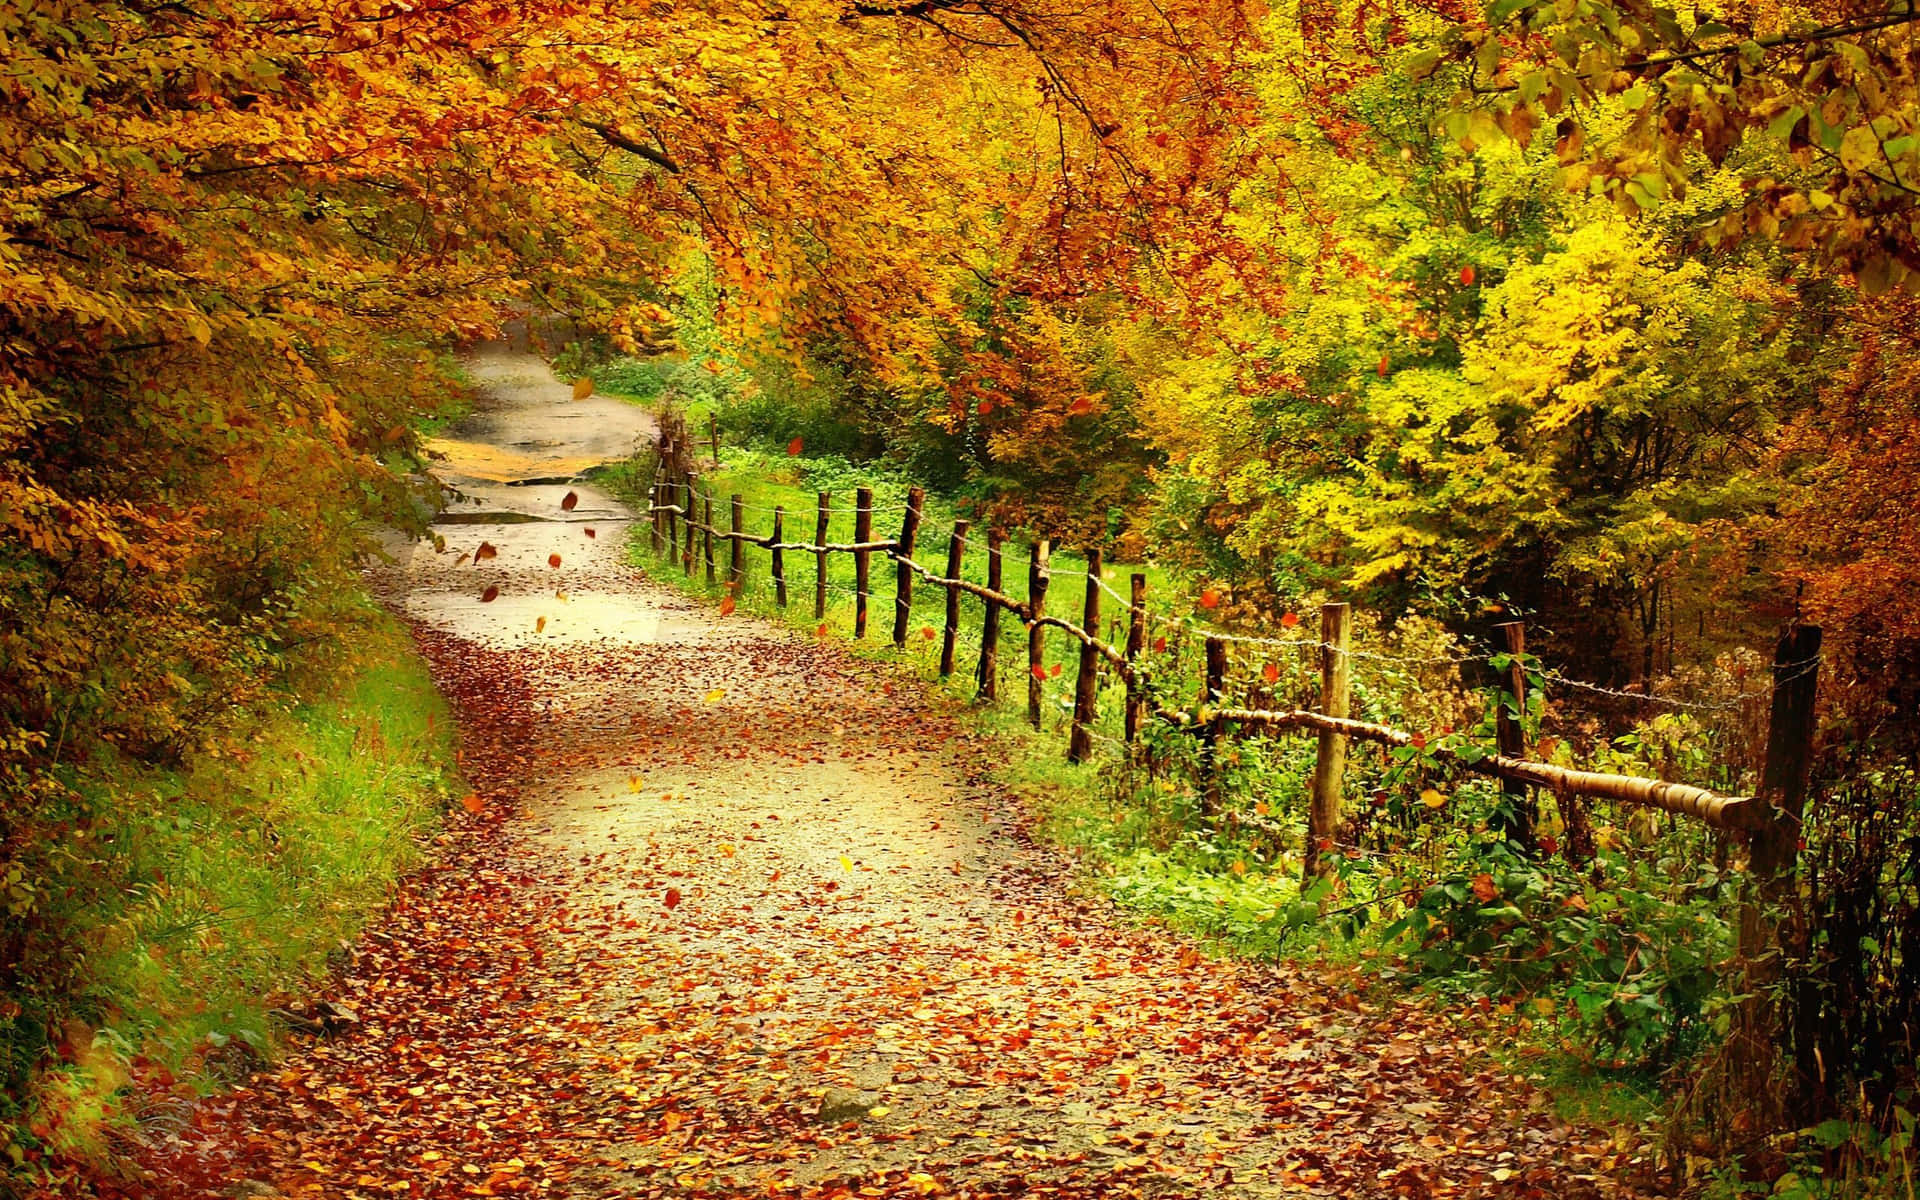 Caption: A Breathtaking Fall Hike Surrounded by Colorful Autumn Foliage Wallpaper